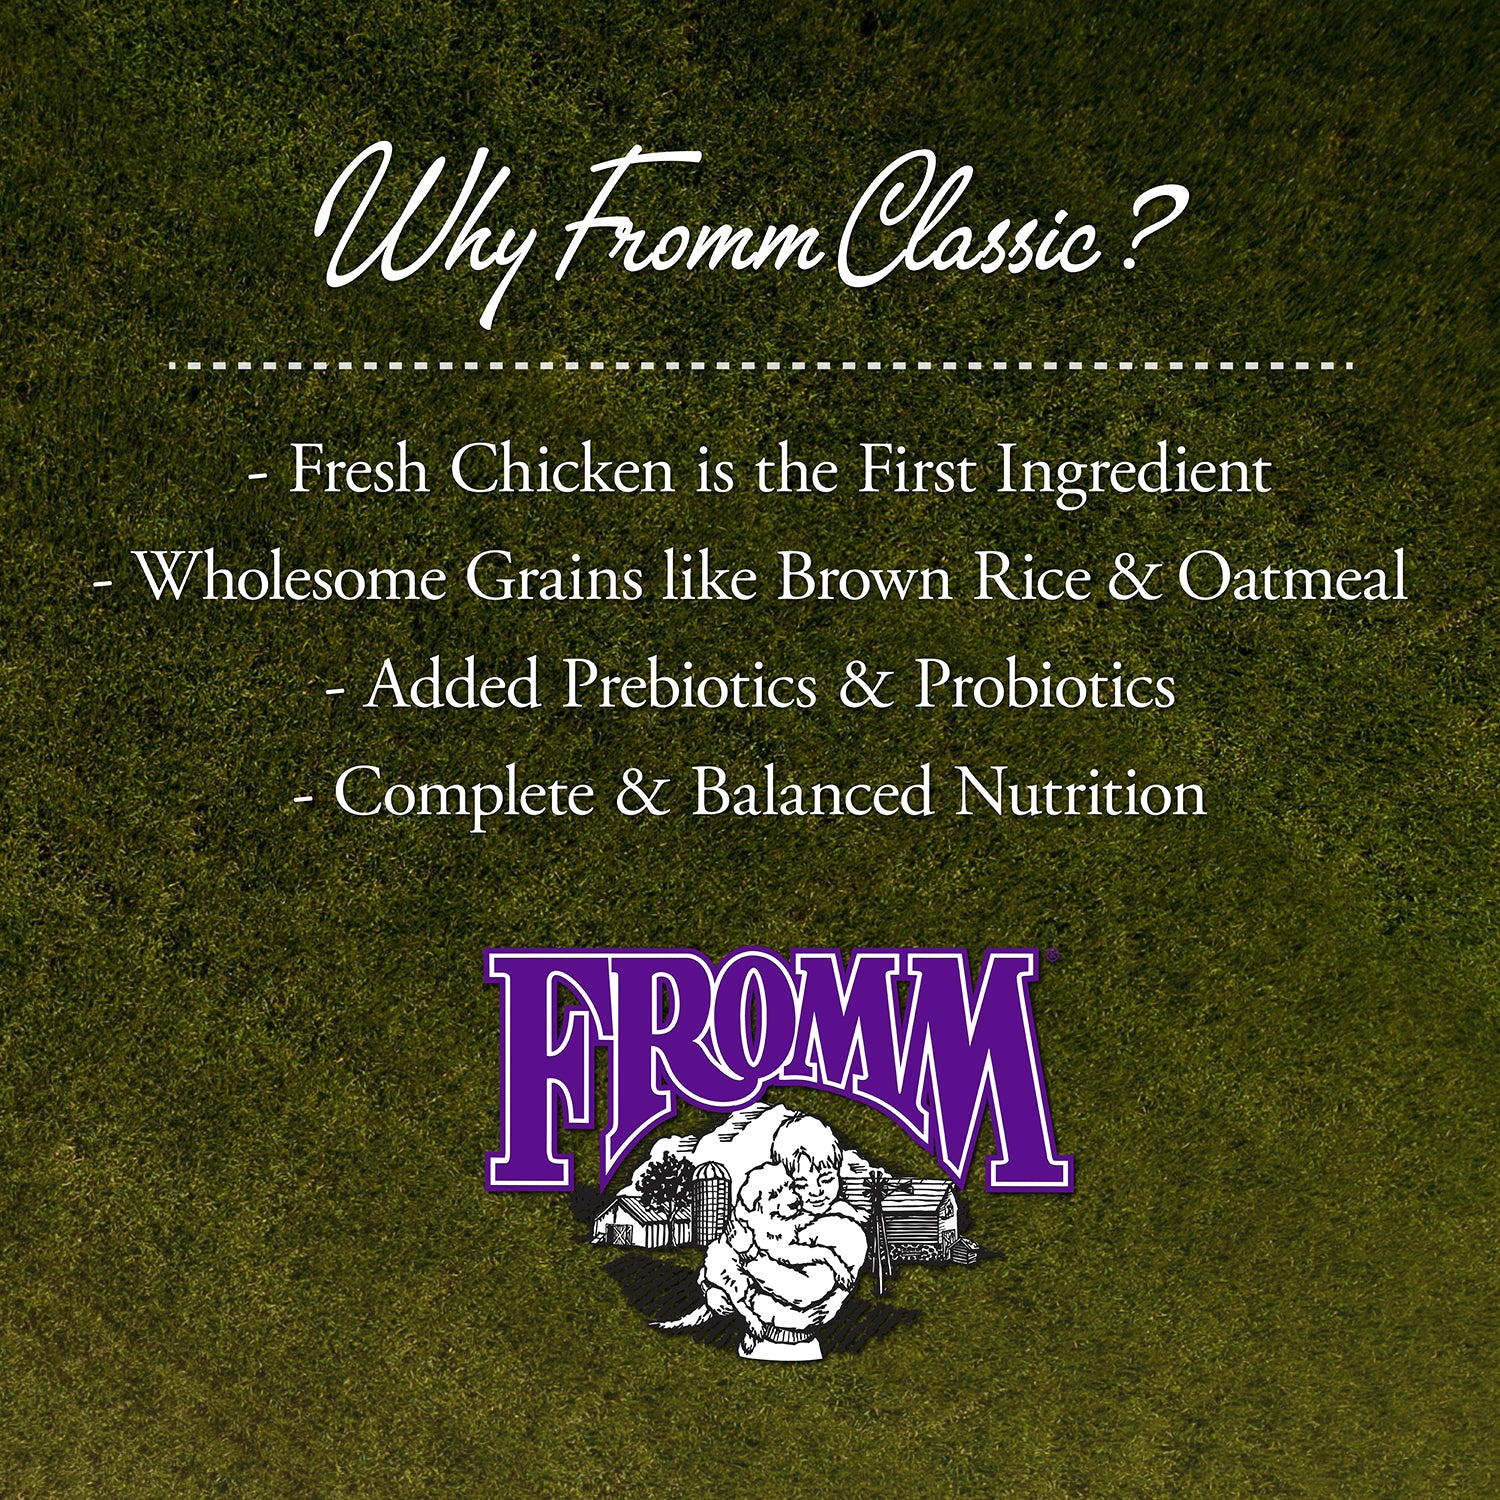 Fromm Classic Adult Dog Food  Dog Food  | PetMax Canada